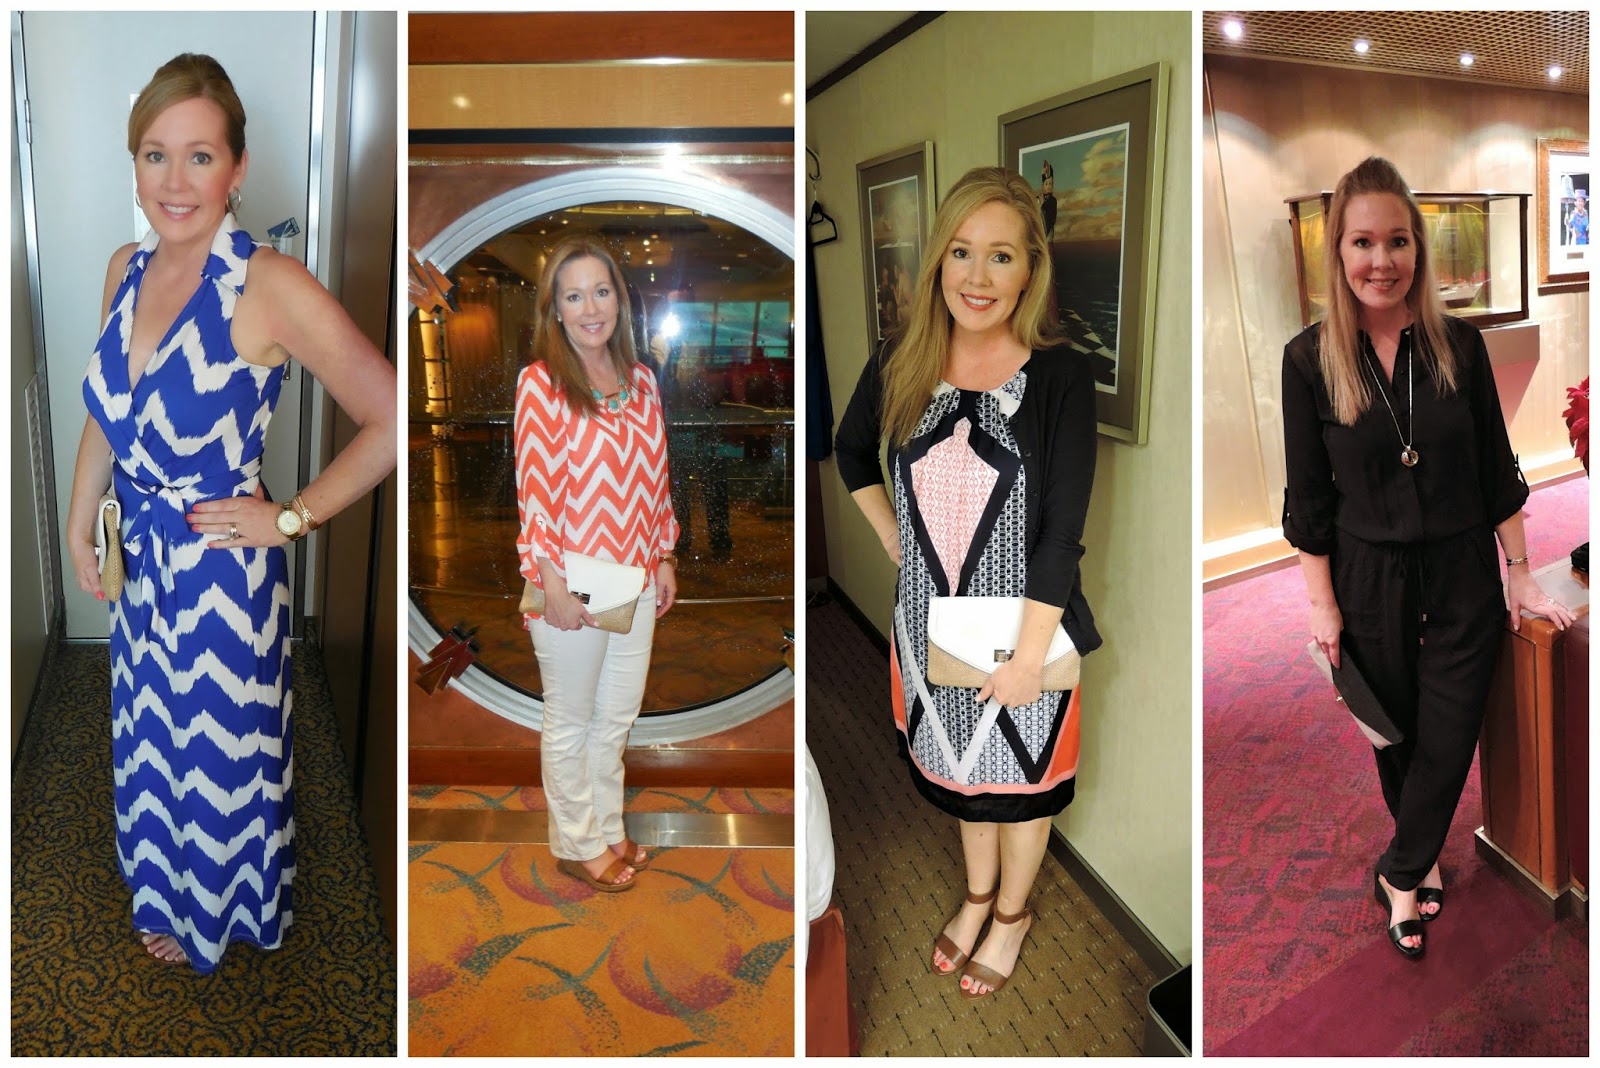 cruise outfit ideas: what to wear on a cruise?